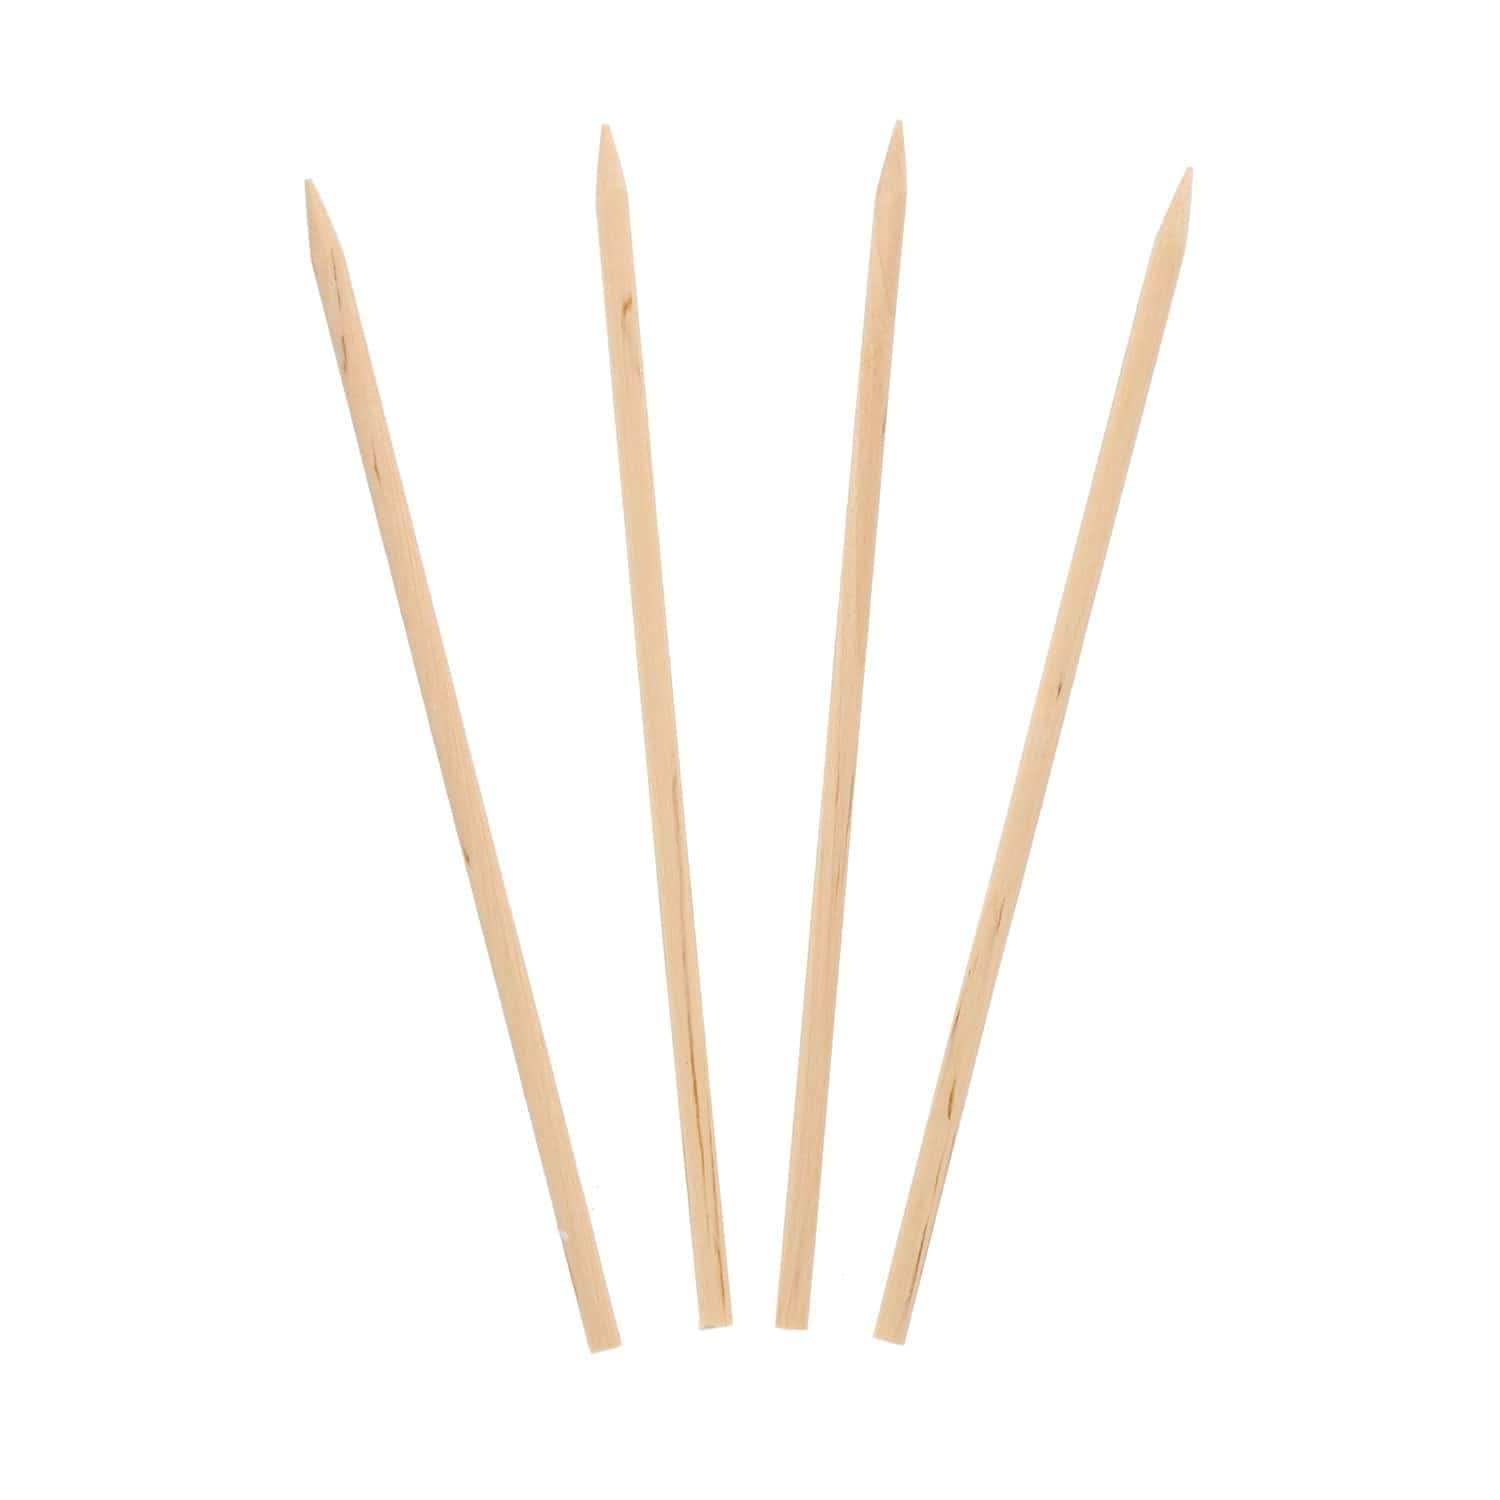 Wooden Sticks and Skewers